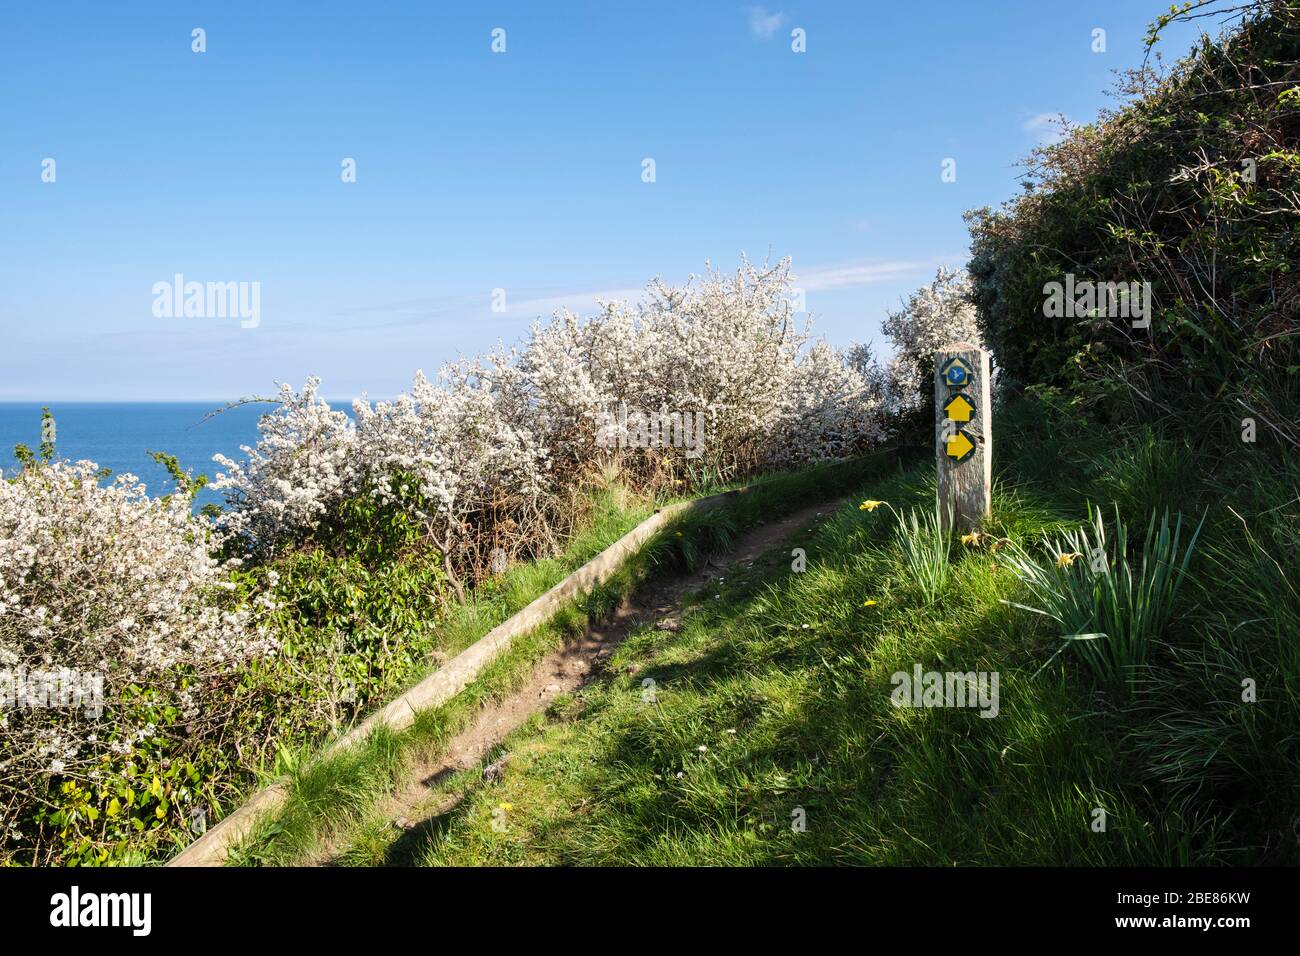 Flowering Blackthorn hedgerow along the coastal footpath with waymarker sign in spring. Benllech, Isle of Anglesey, Wales, UK, Britain Stock Photo